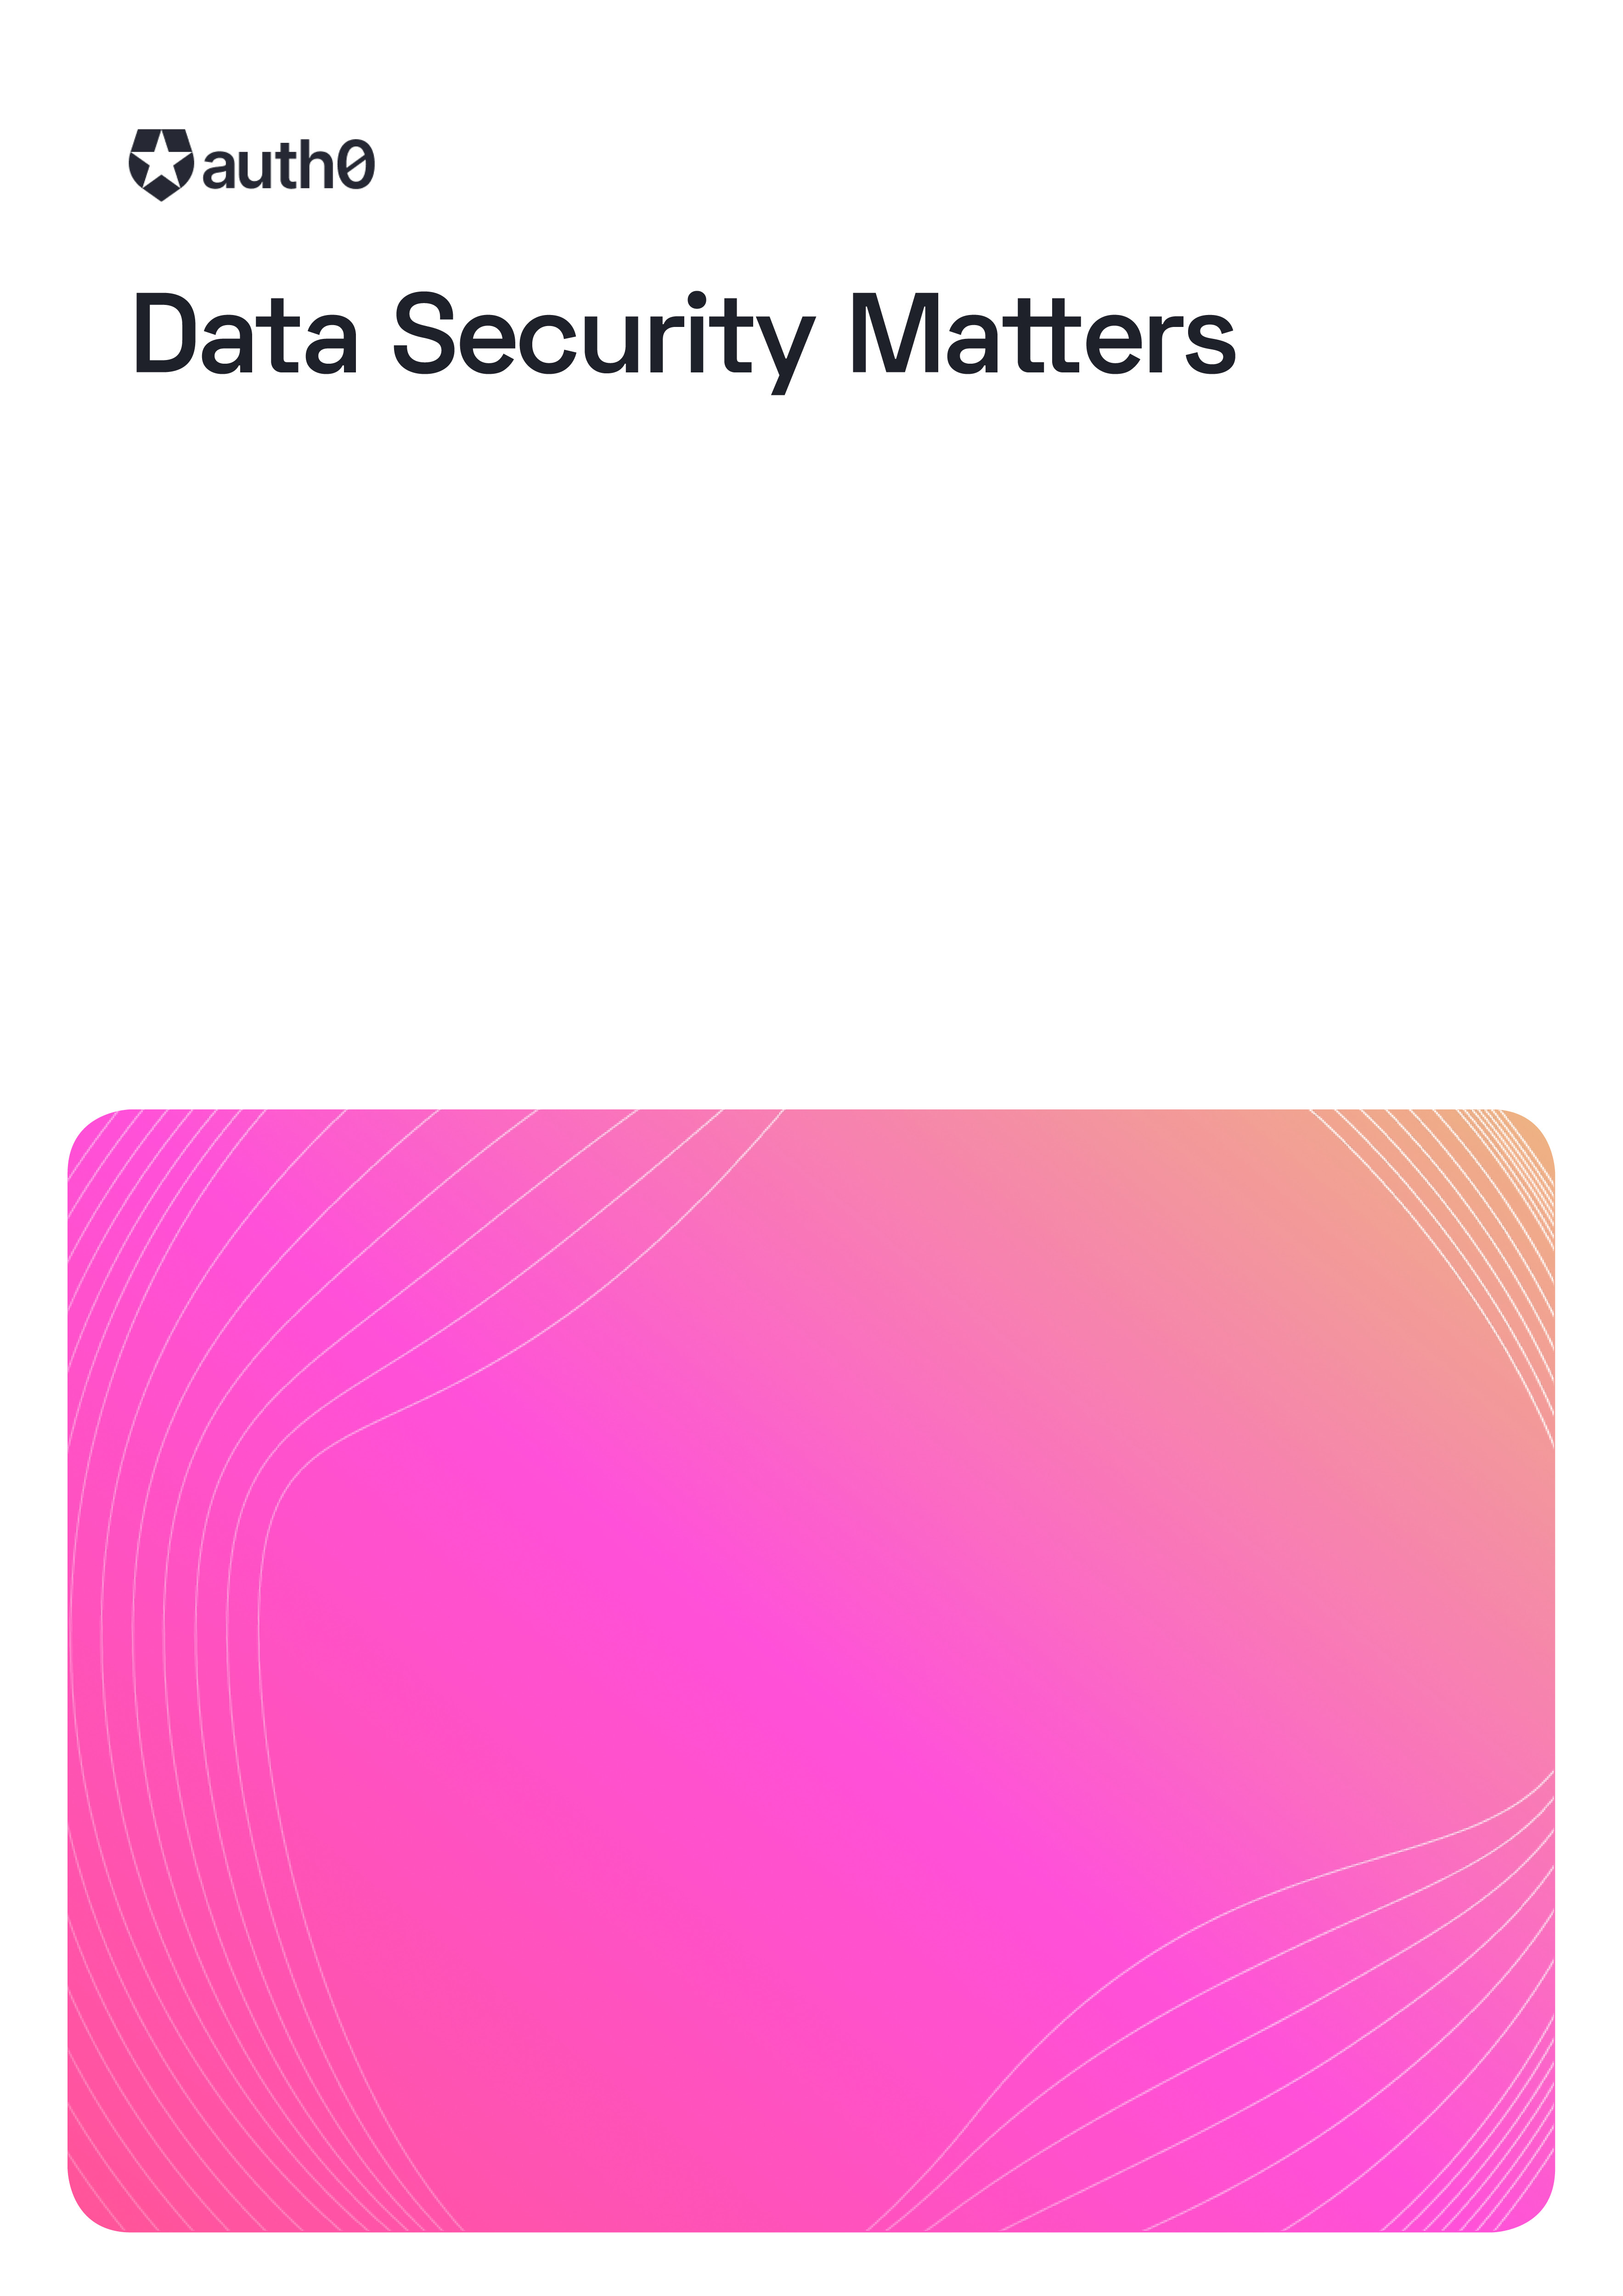 Data Security Matters